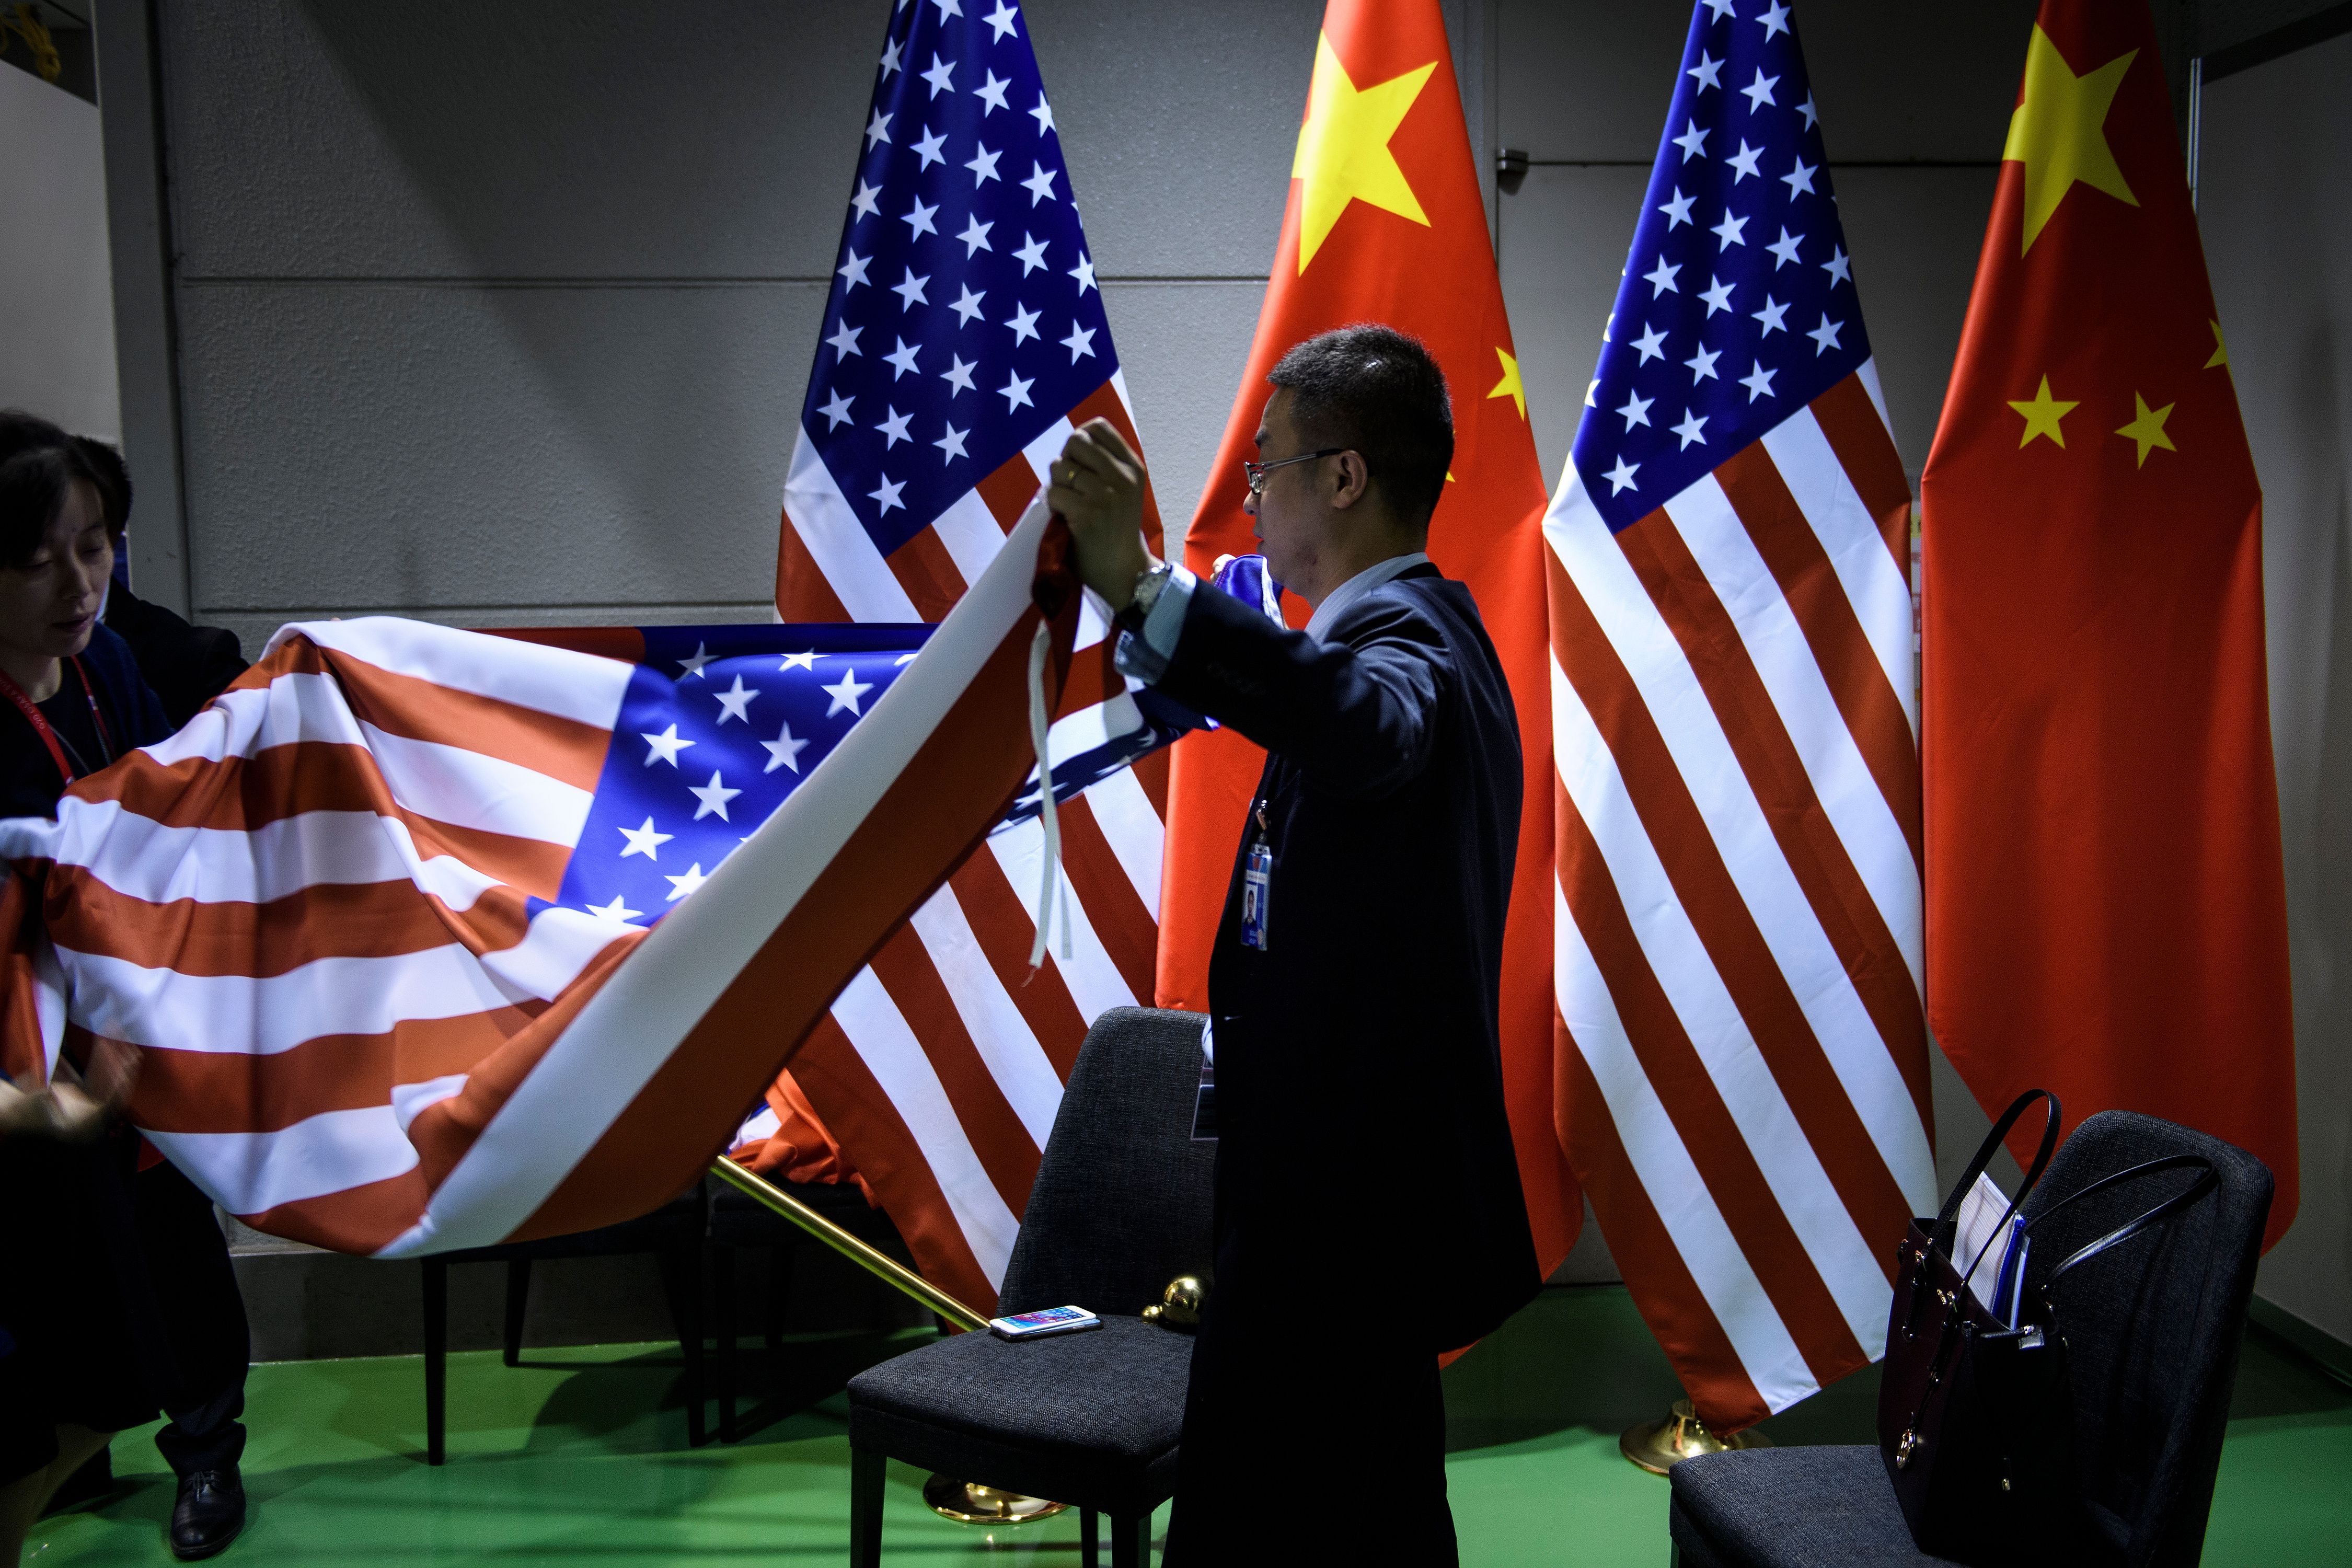 Staff fold flags while US President Donald Trump and China's President Xi Jinping hold a bilateral meeting on the sidelines of the G20 Summit in Osaka on June 29.